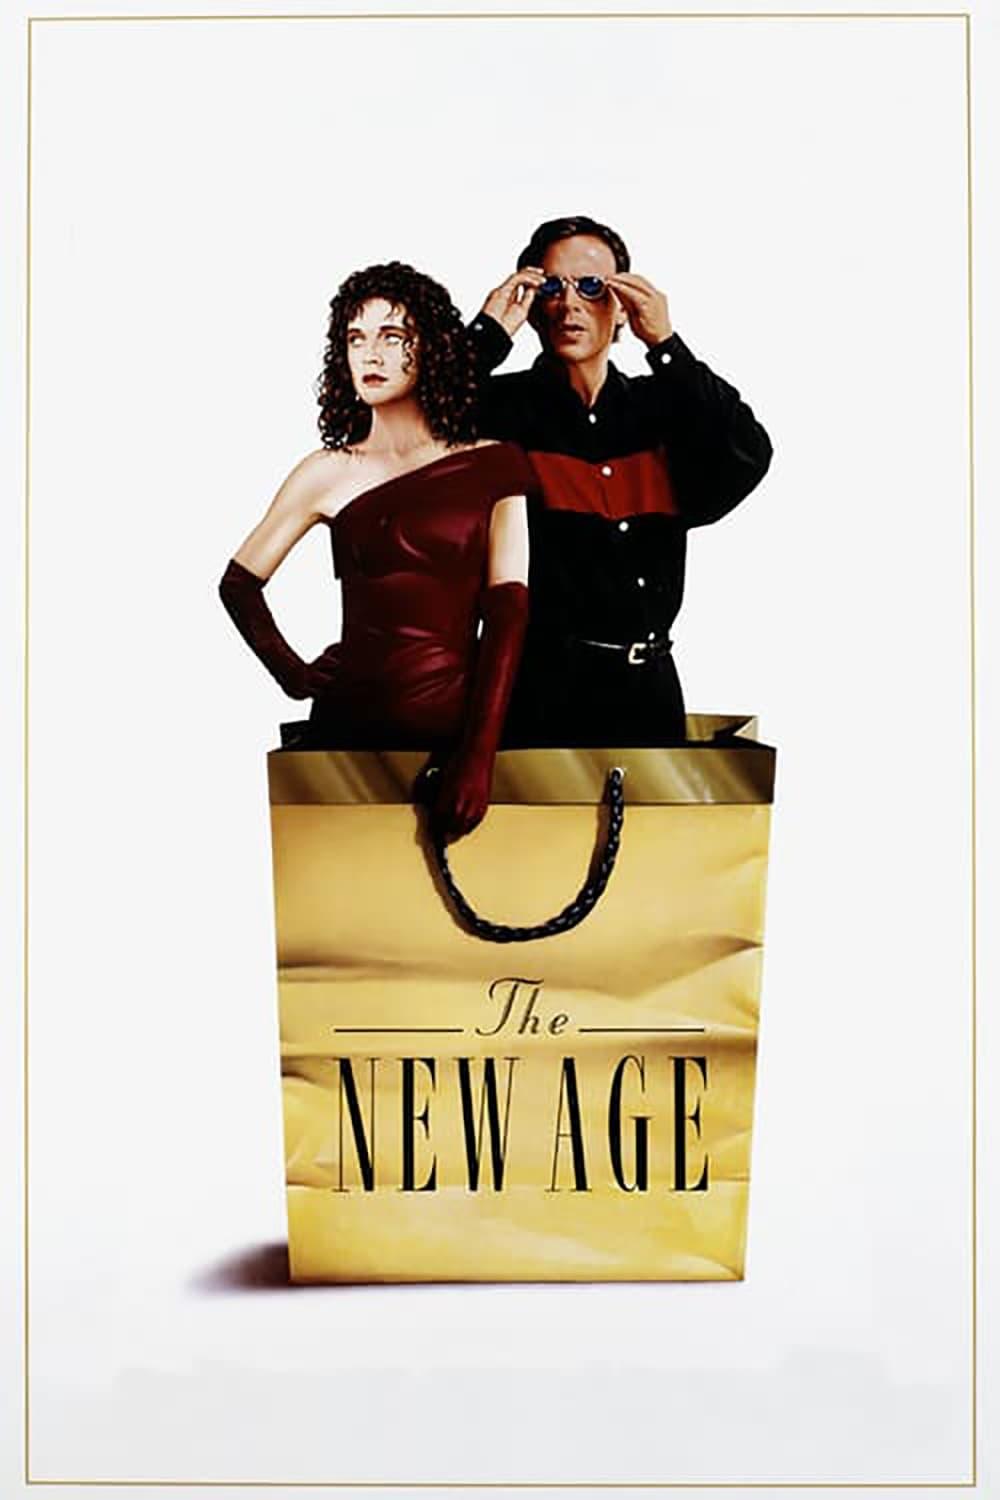 The New Age poster